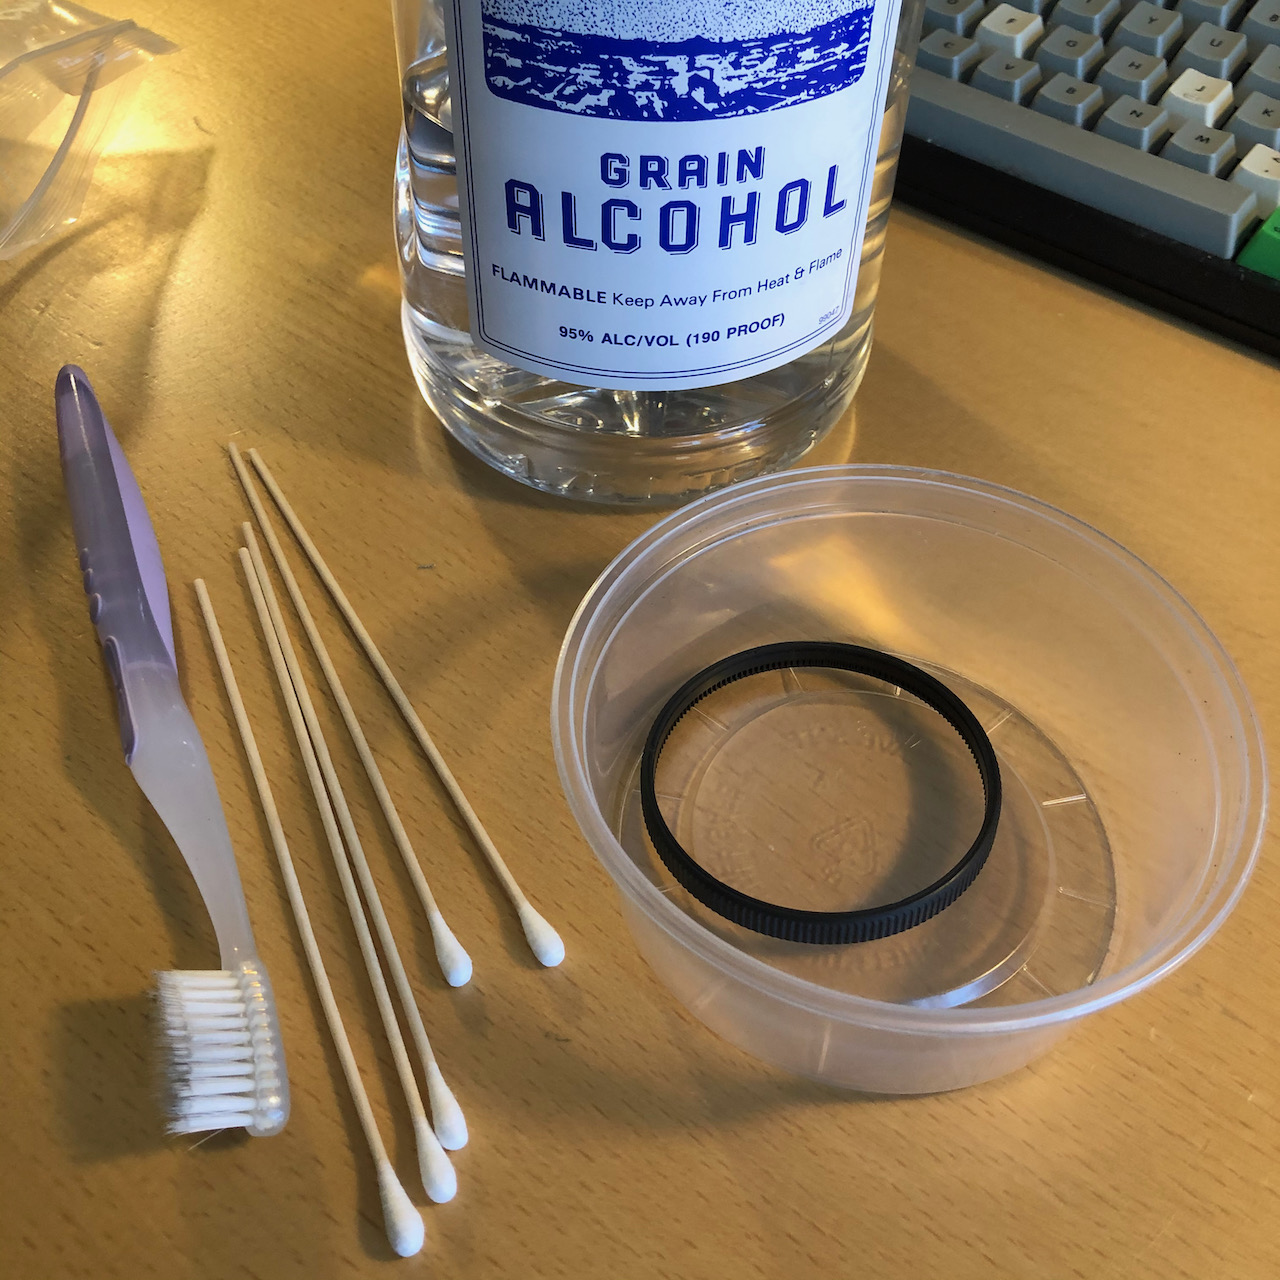 Cleaning the focus ring with alcohol and a toothbrush.